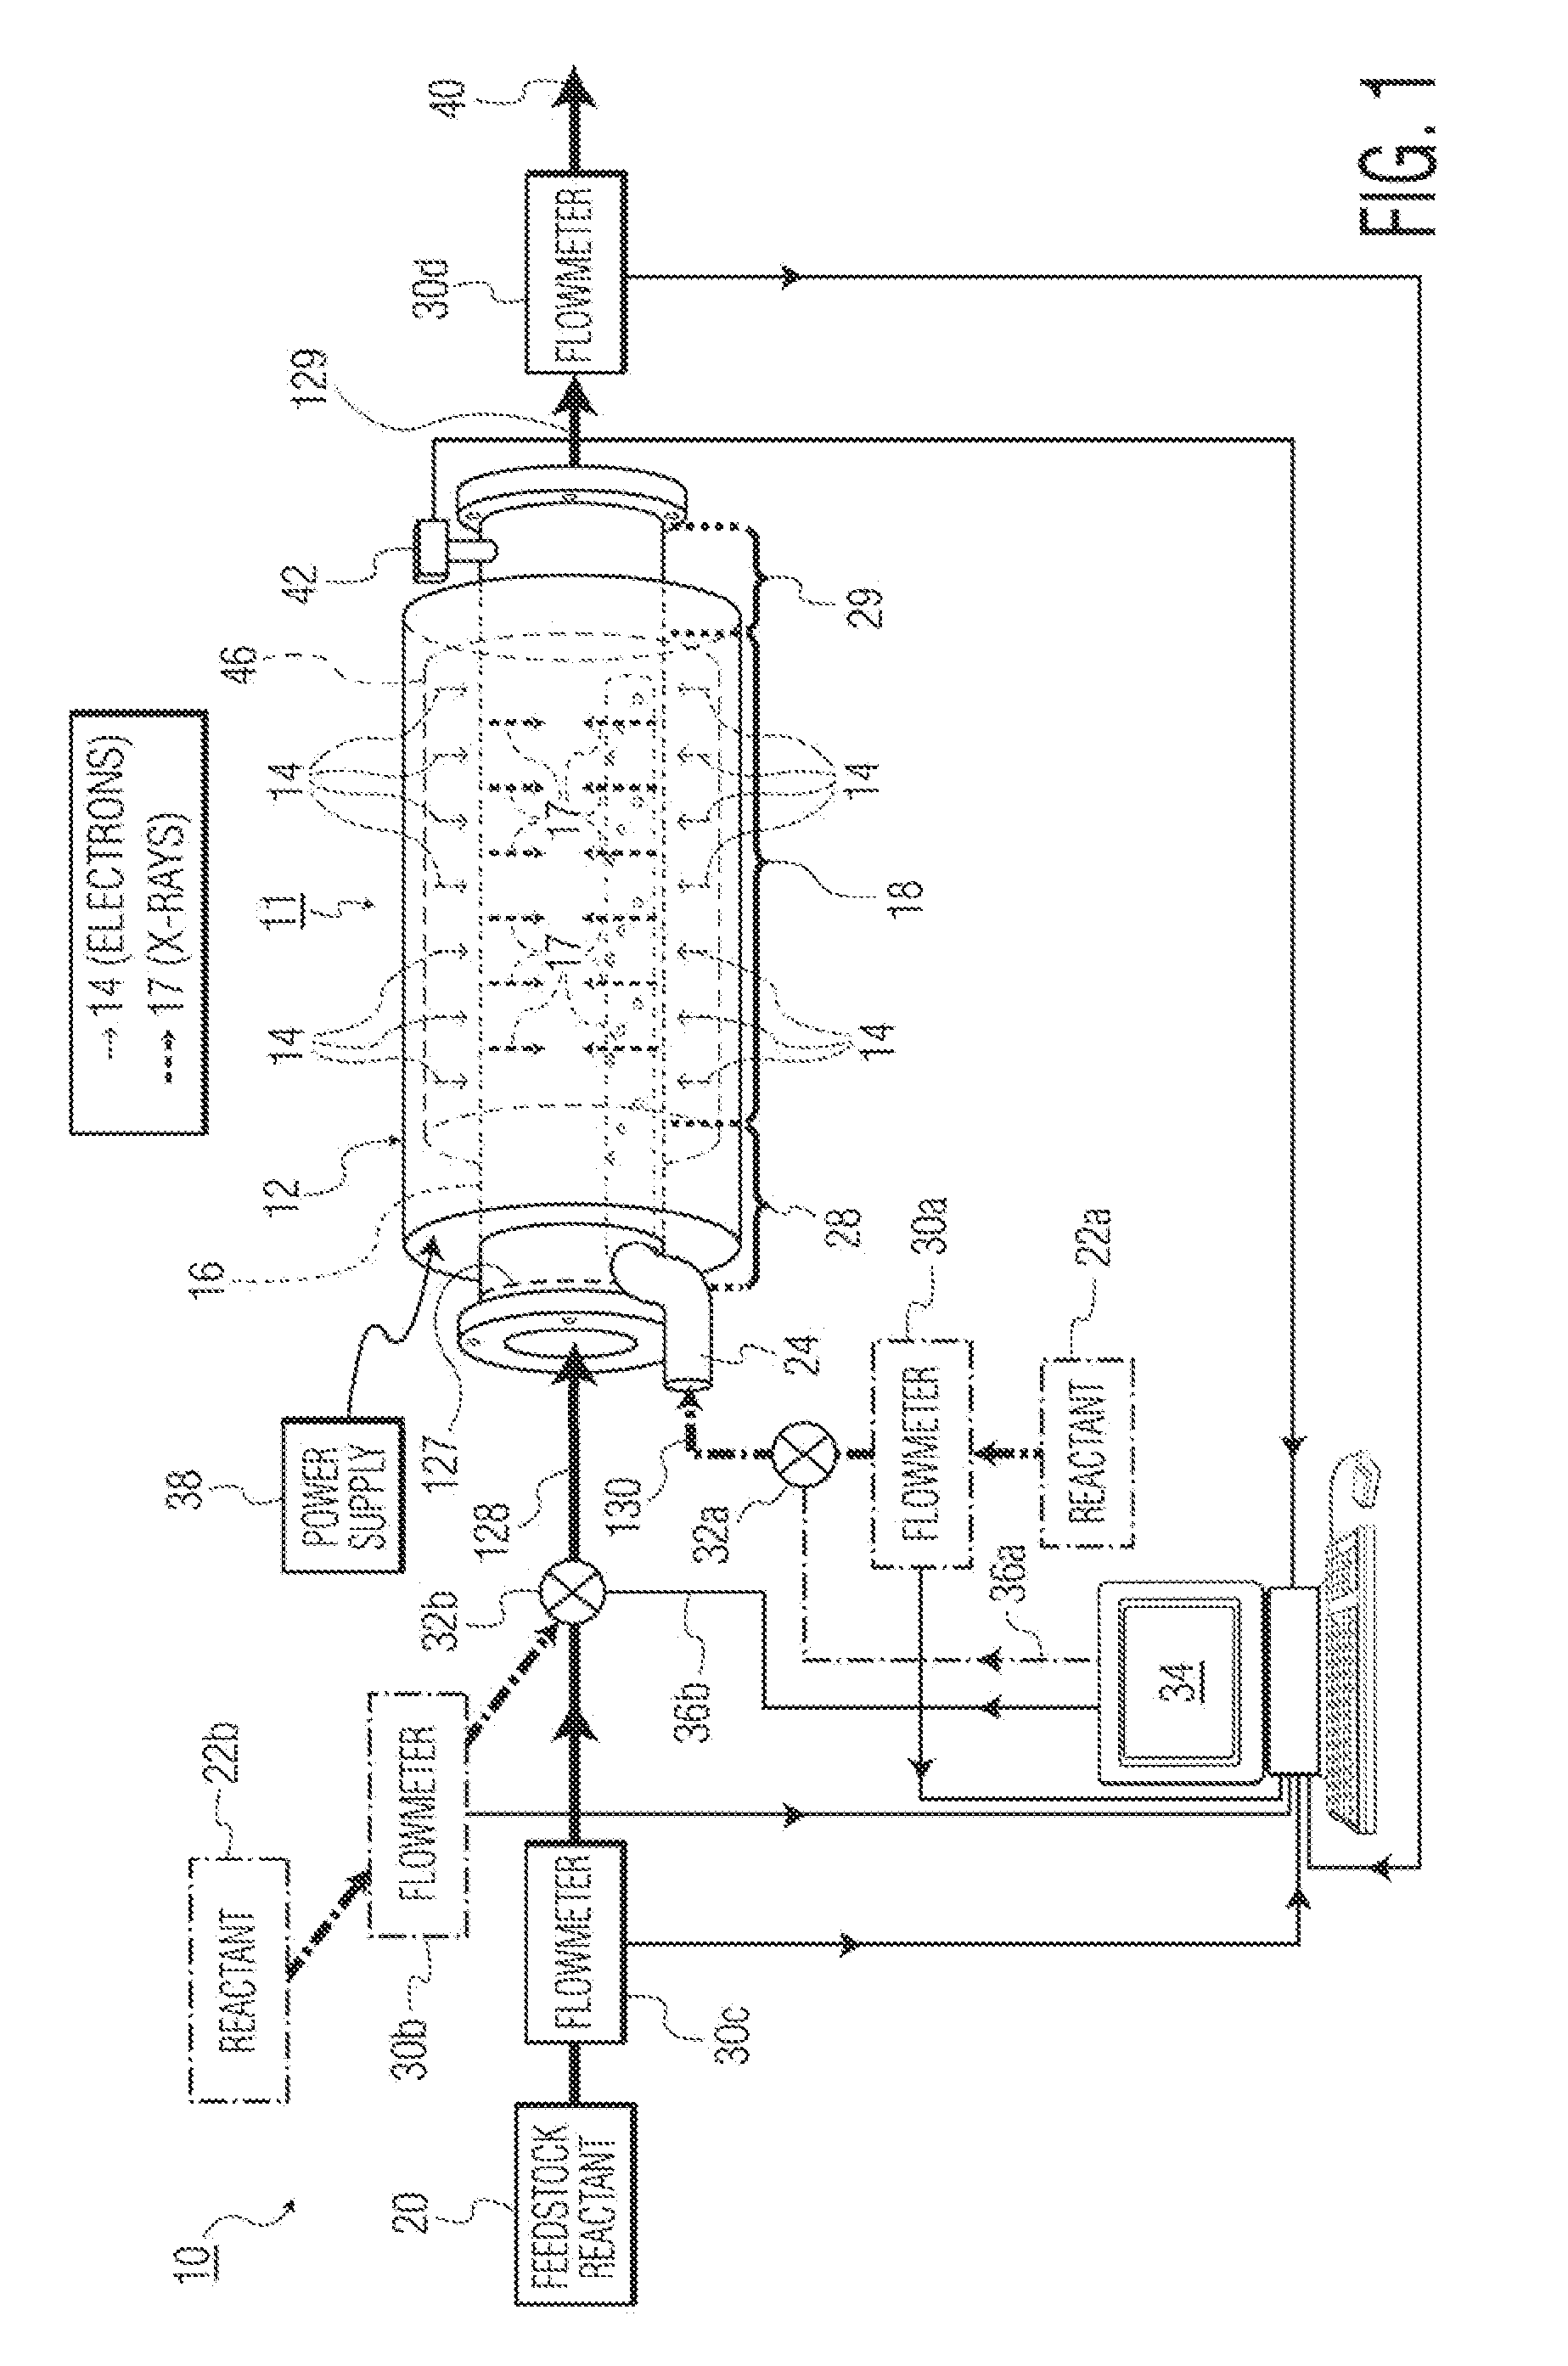 Method and apparatus for inducing chemical reactions by X-ray irradiation